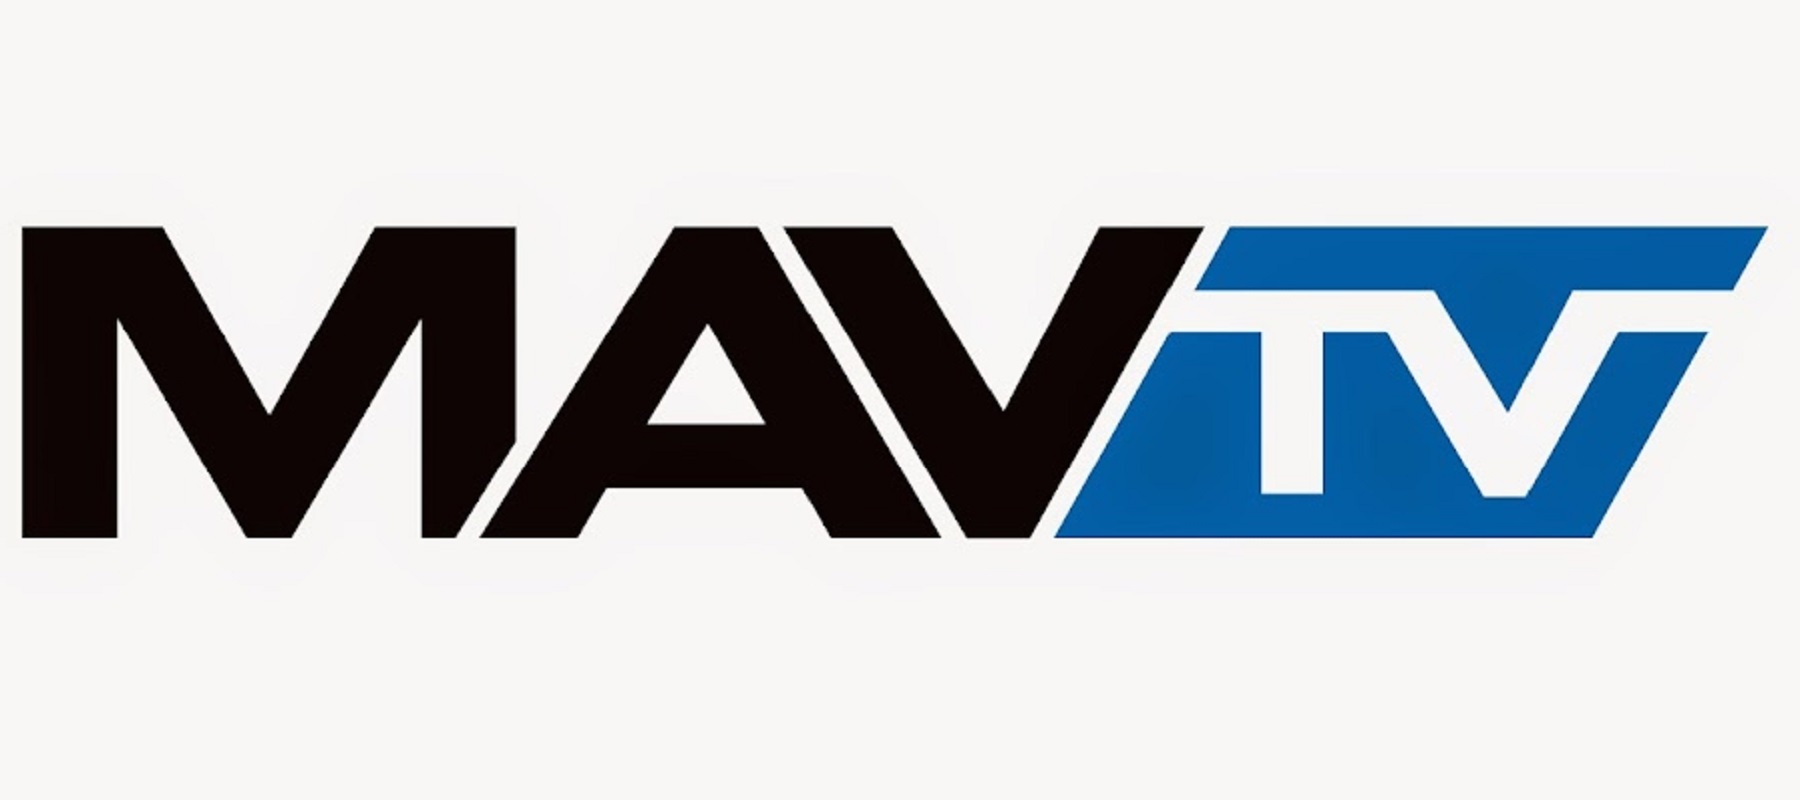 MAVTV names DRIVEN360 global agency of record for PR and brand communications